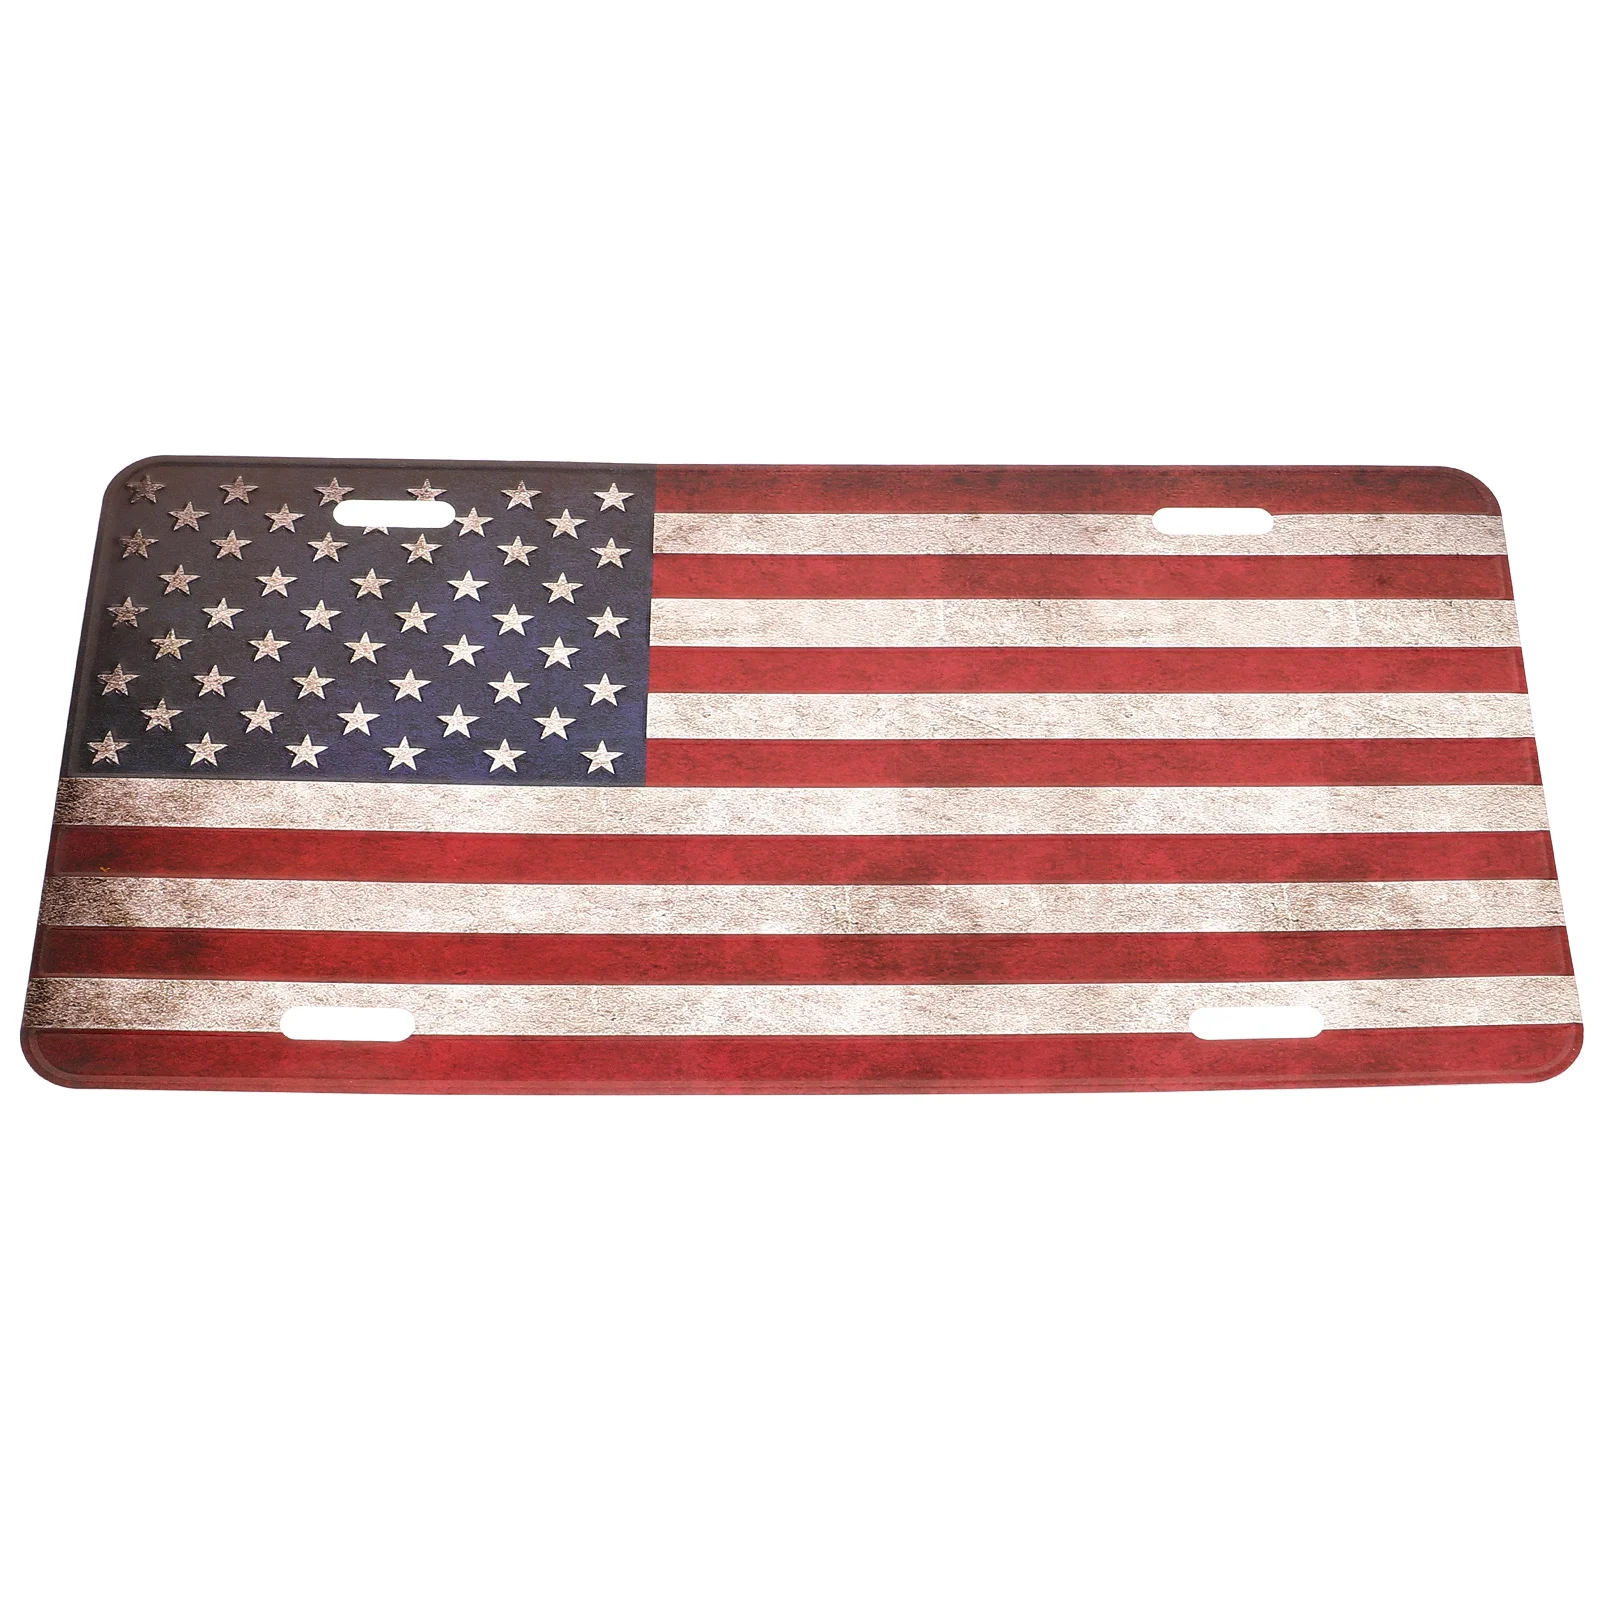 

Rustic Usa Flag American Flag License Plate Novelty Auto Car Tag License Plate Holder Vanity Gift American Patriotic Us Vehicle